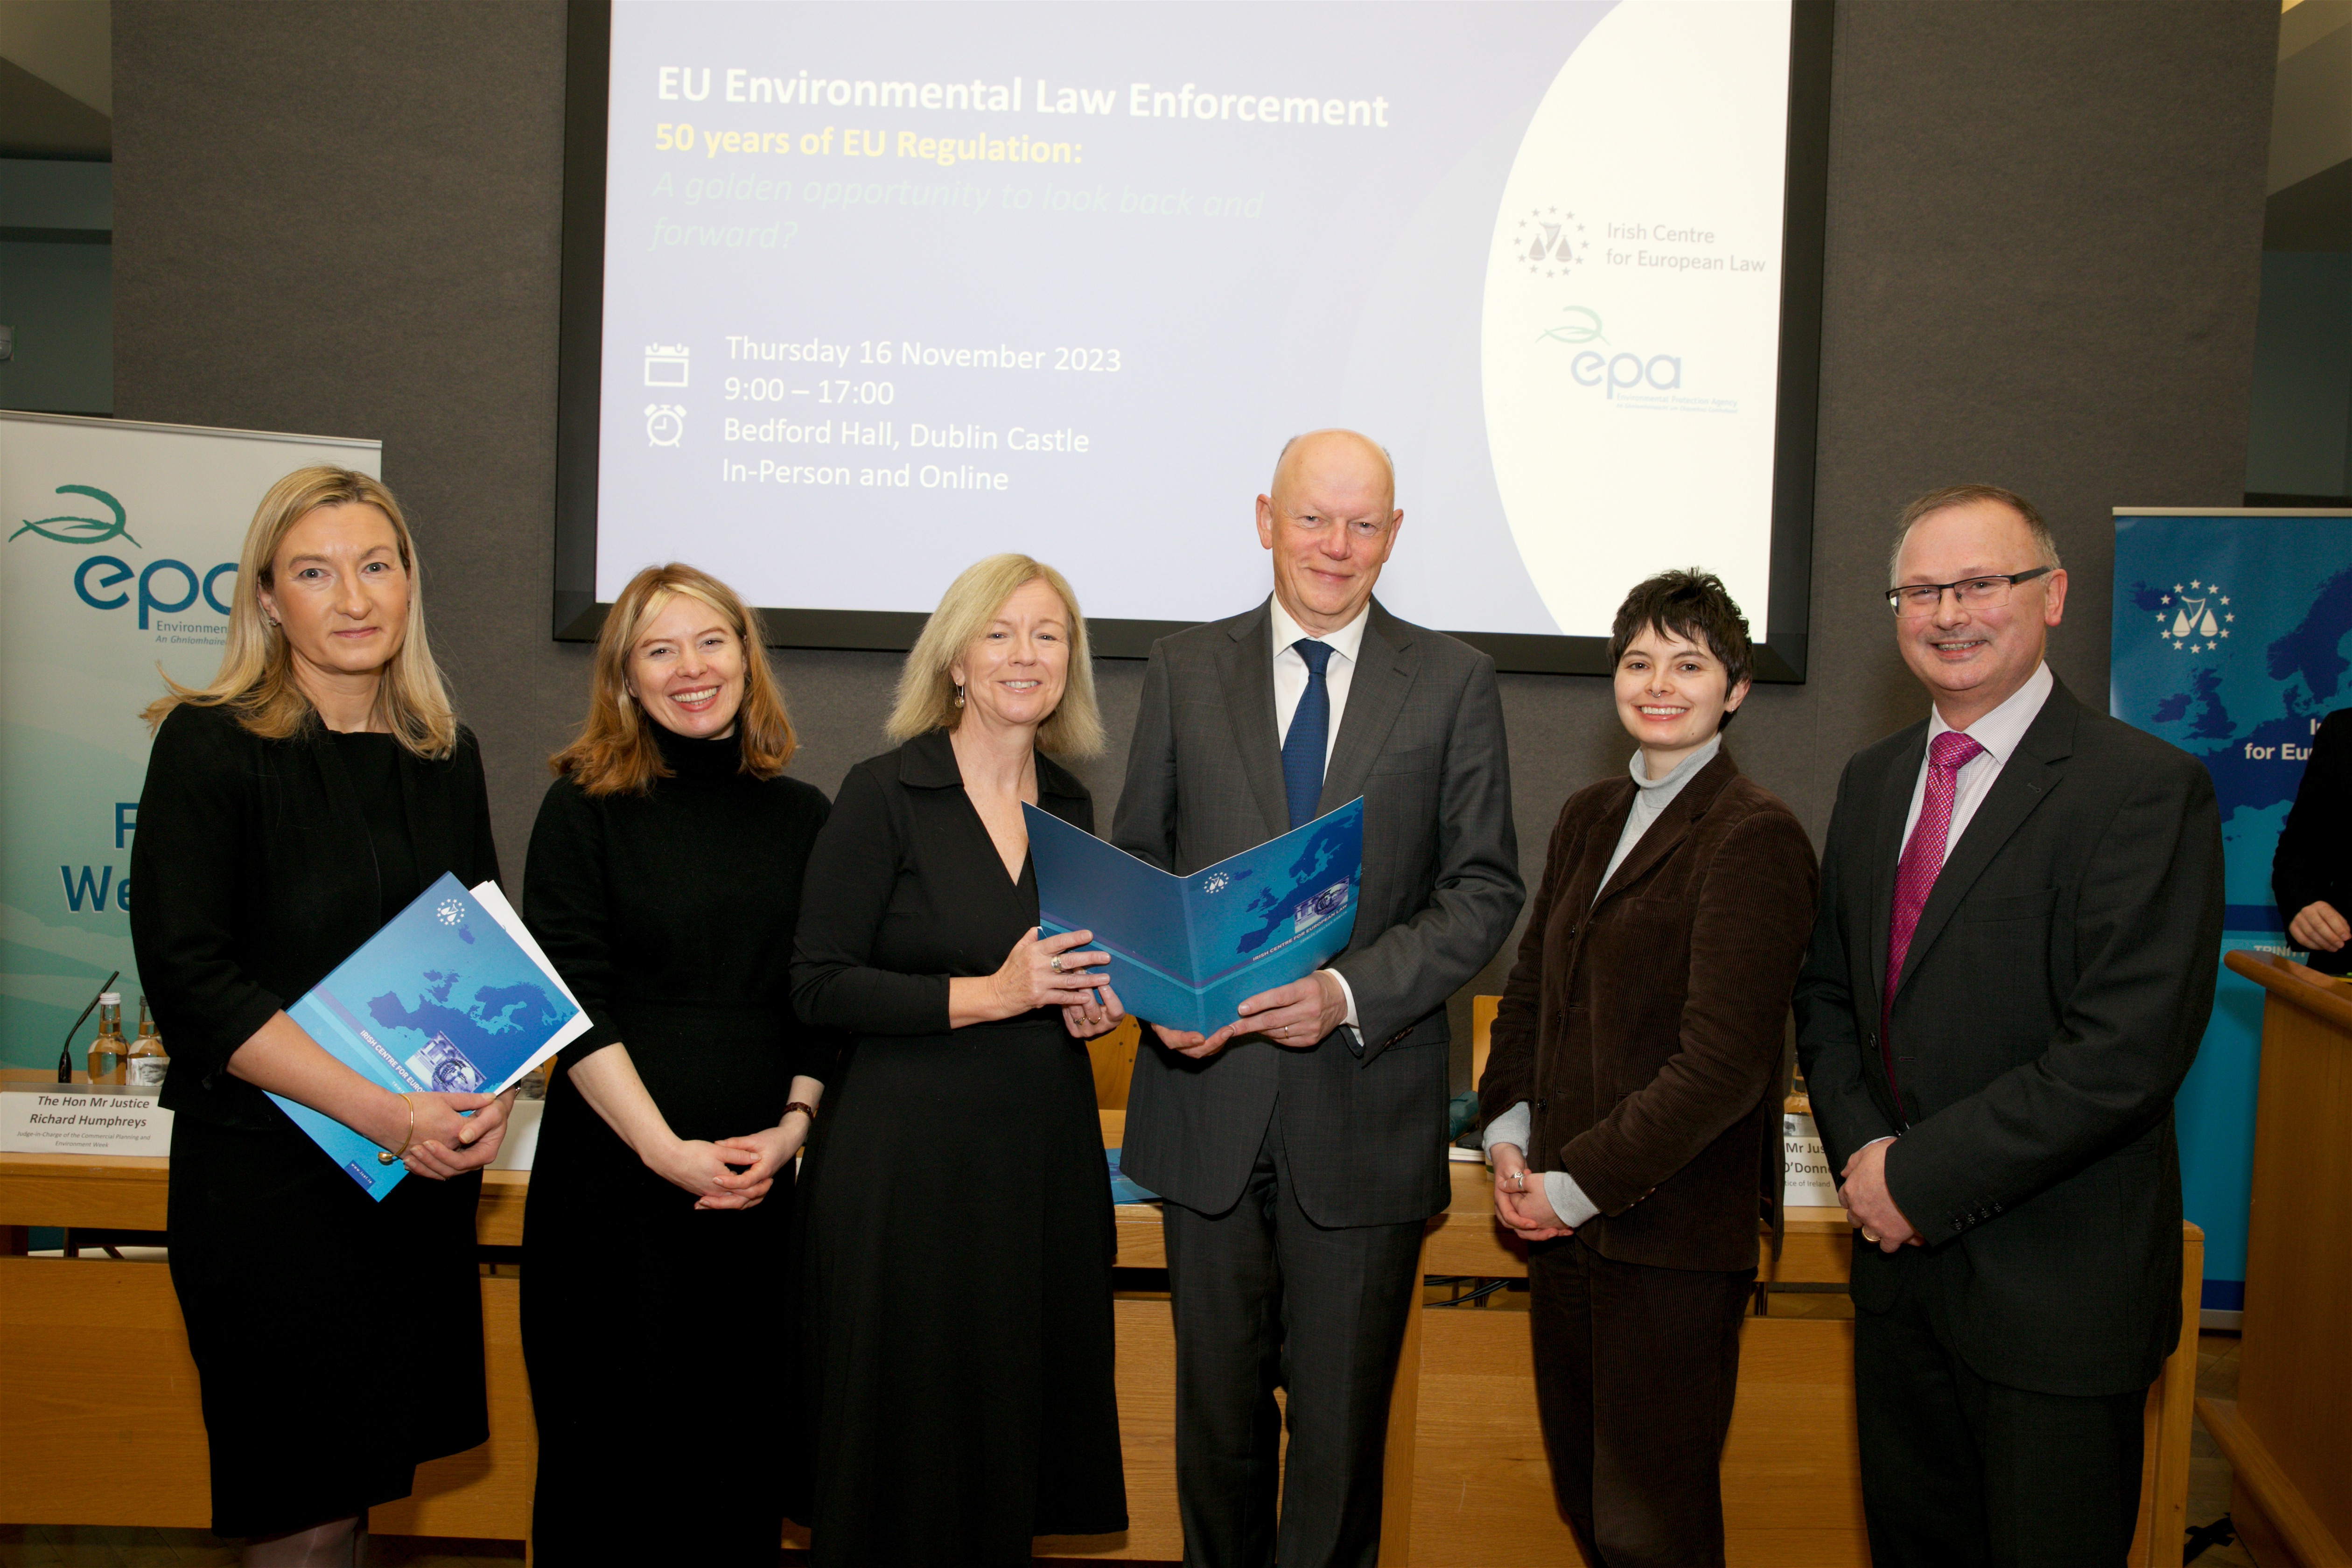 Niamh Guiry, PhD Researcher, presents at Environmental Protection Agency and Irish Centre for European Law (ICEL) Environmental Law Enforcement Conference 